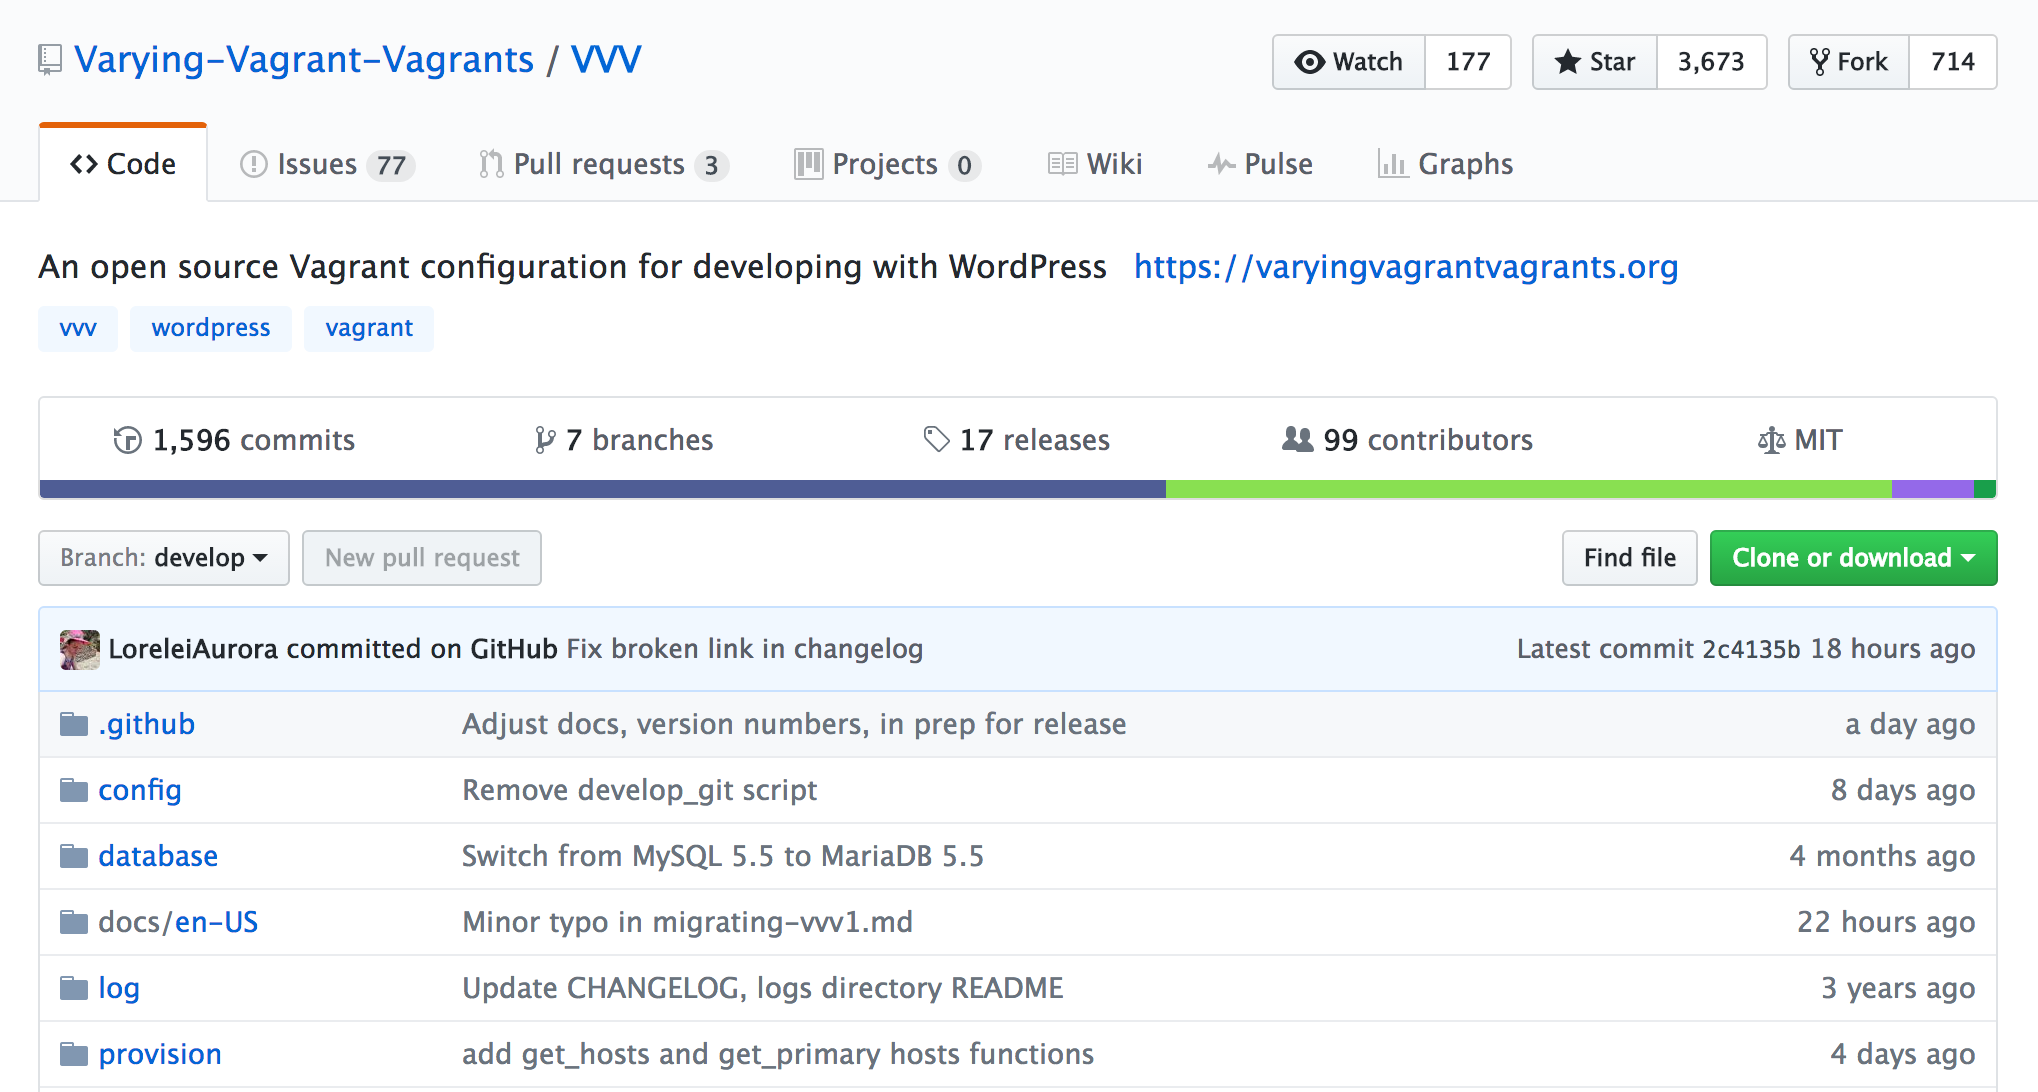 Varying Vagrant Vagrants 2.0.0 Introduces YAML Configuration, Revamps Documentation